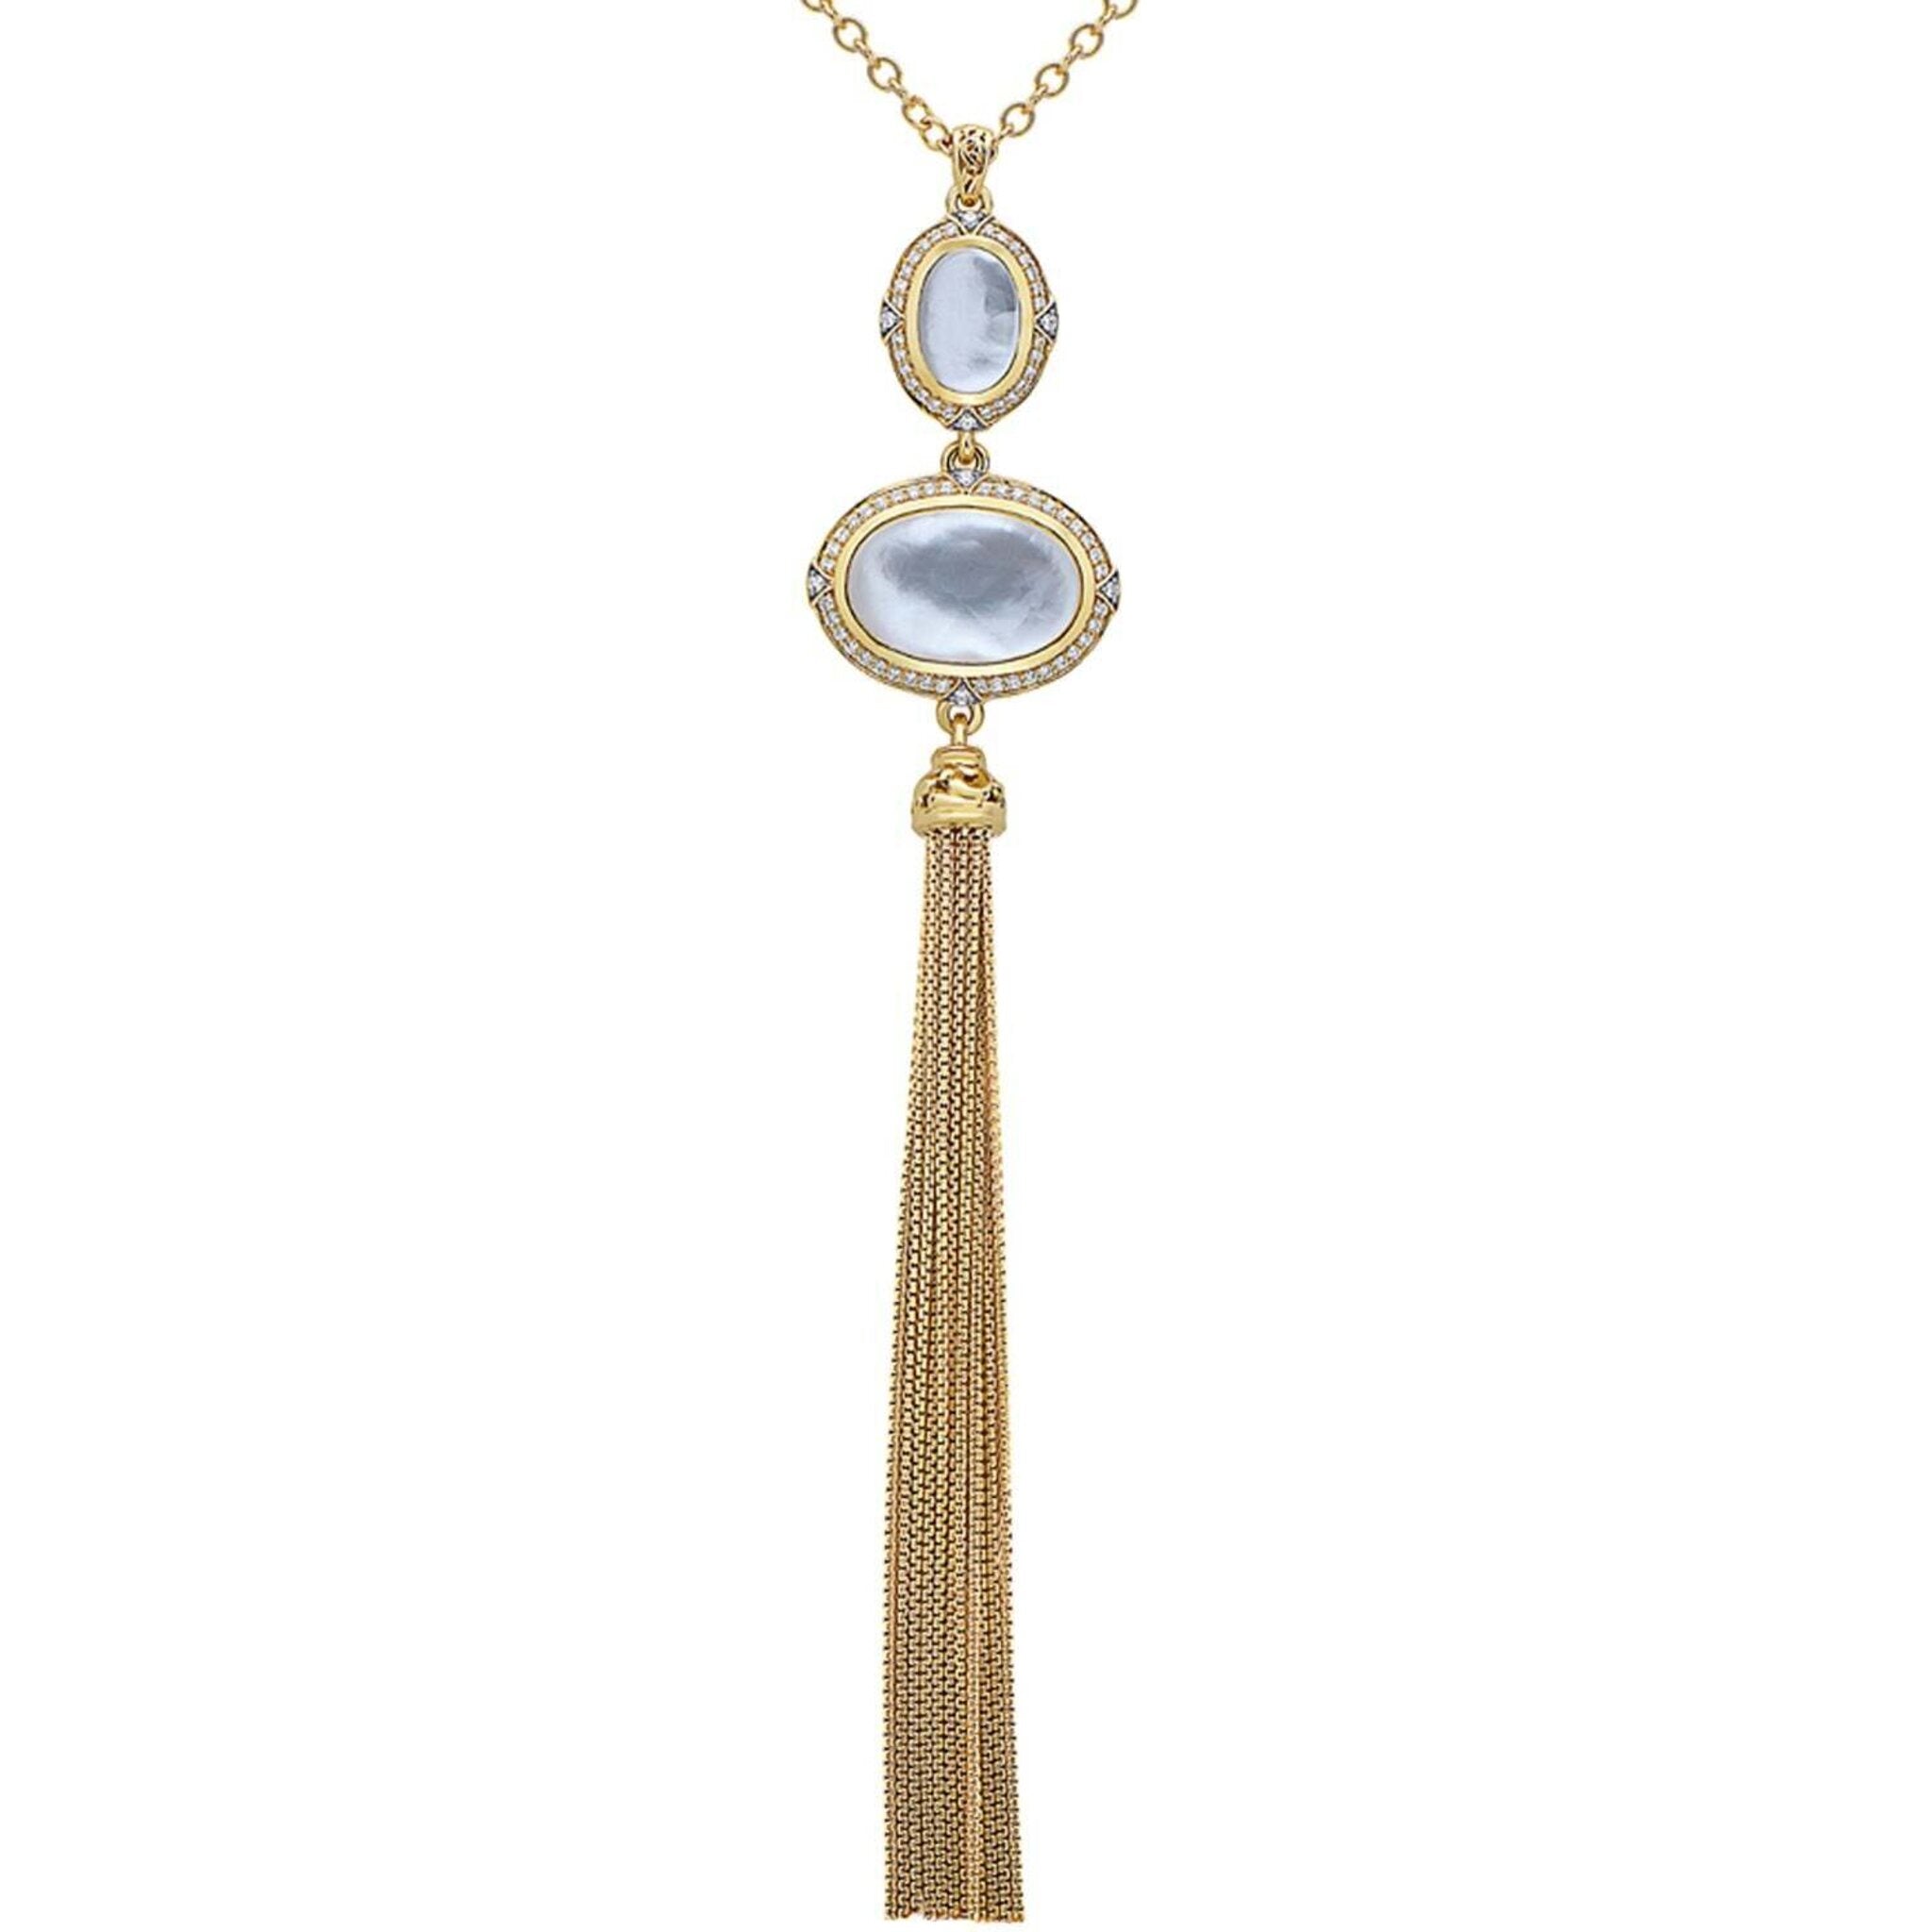 Charles Krypell - Diamond Tassel Necklace - White Mother of Pearl